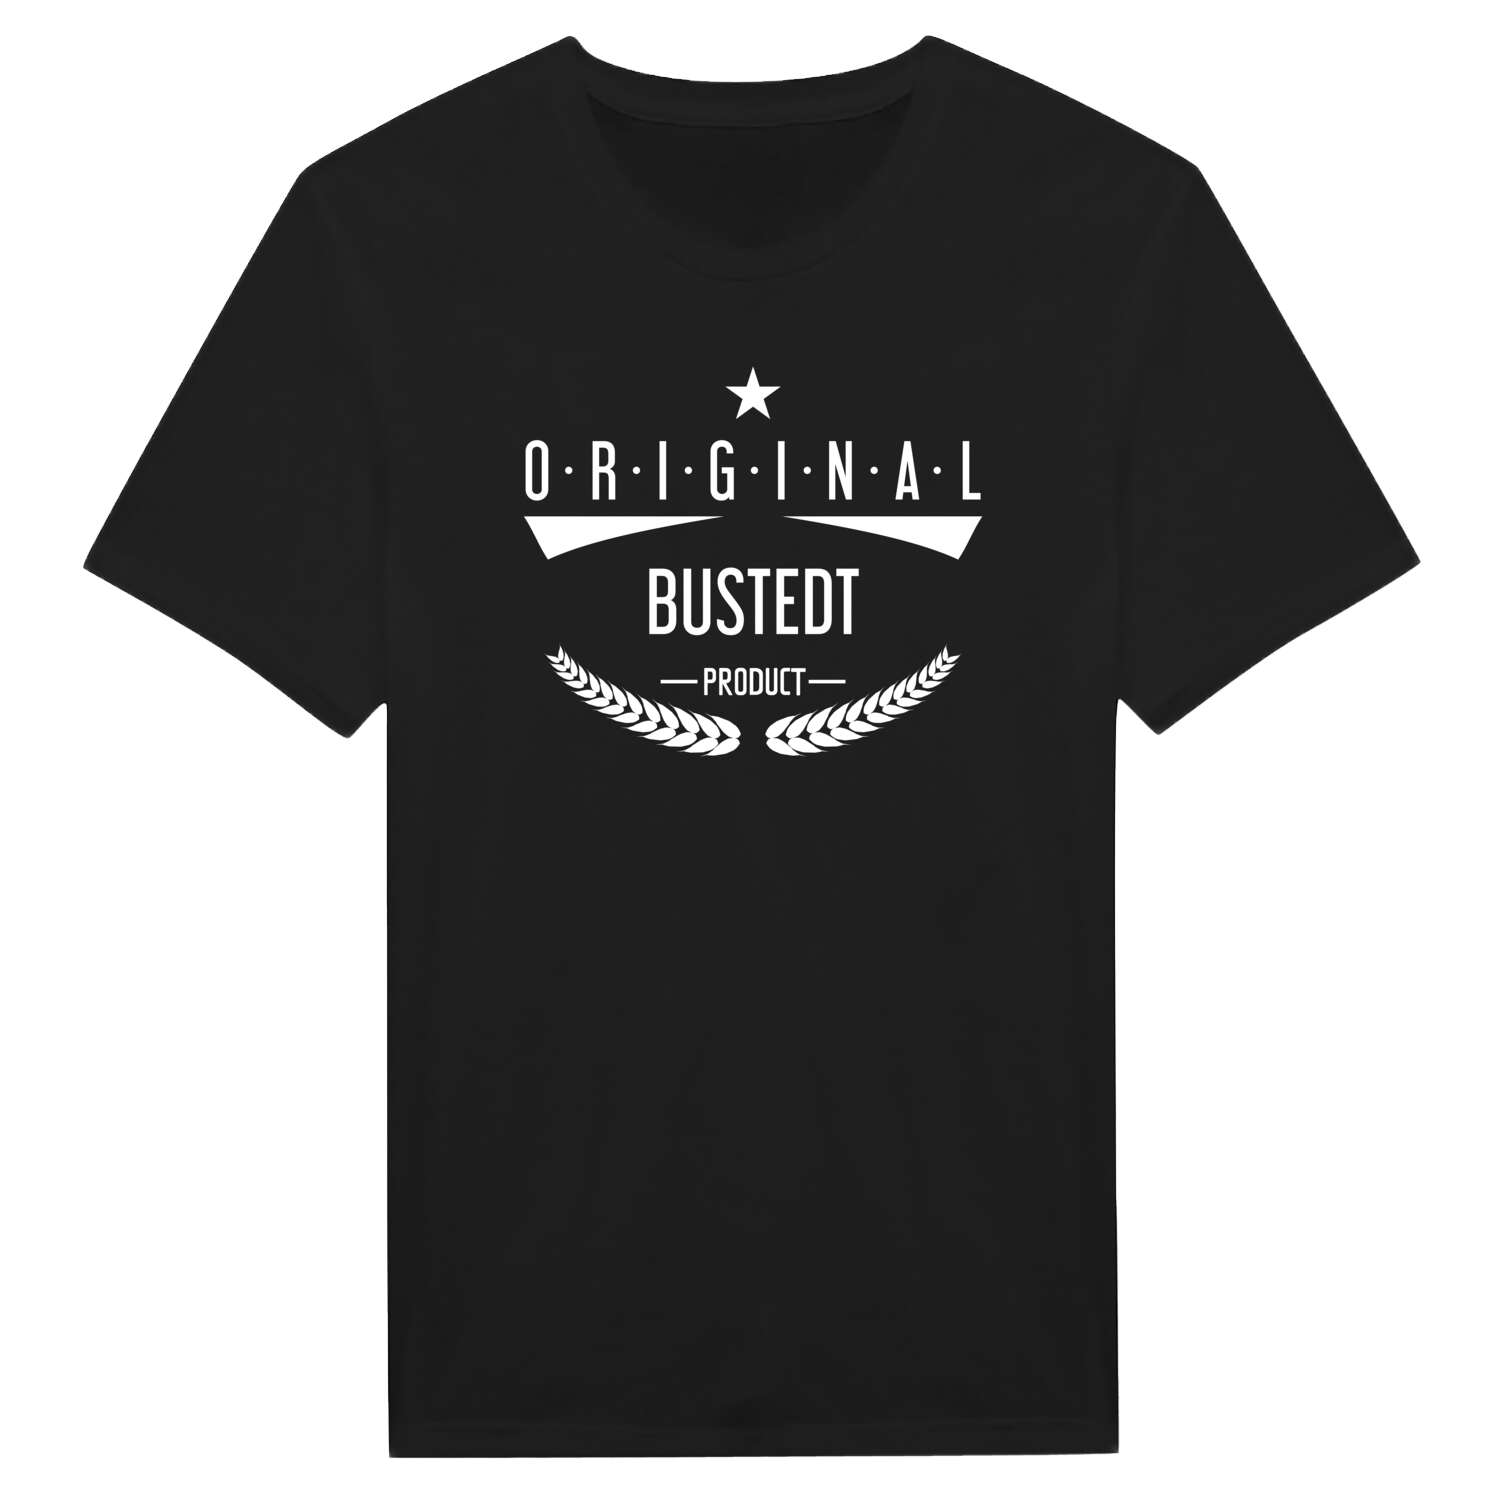 Bustedt T-Shirt »Original Product«